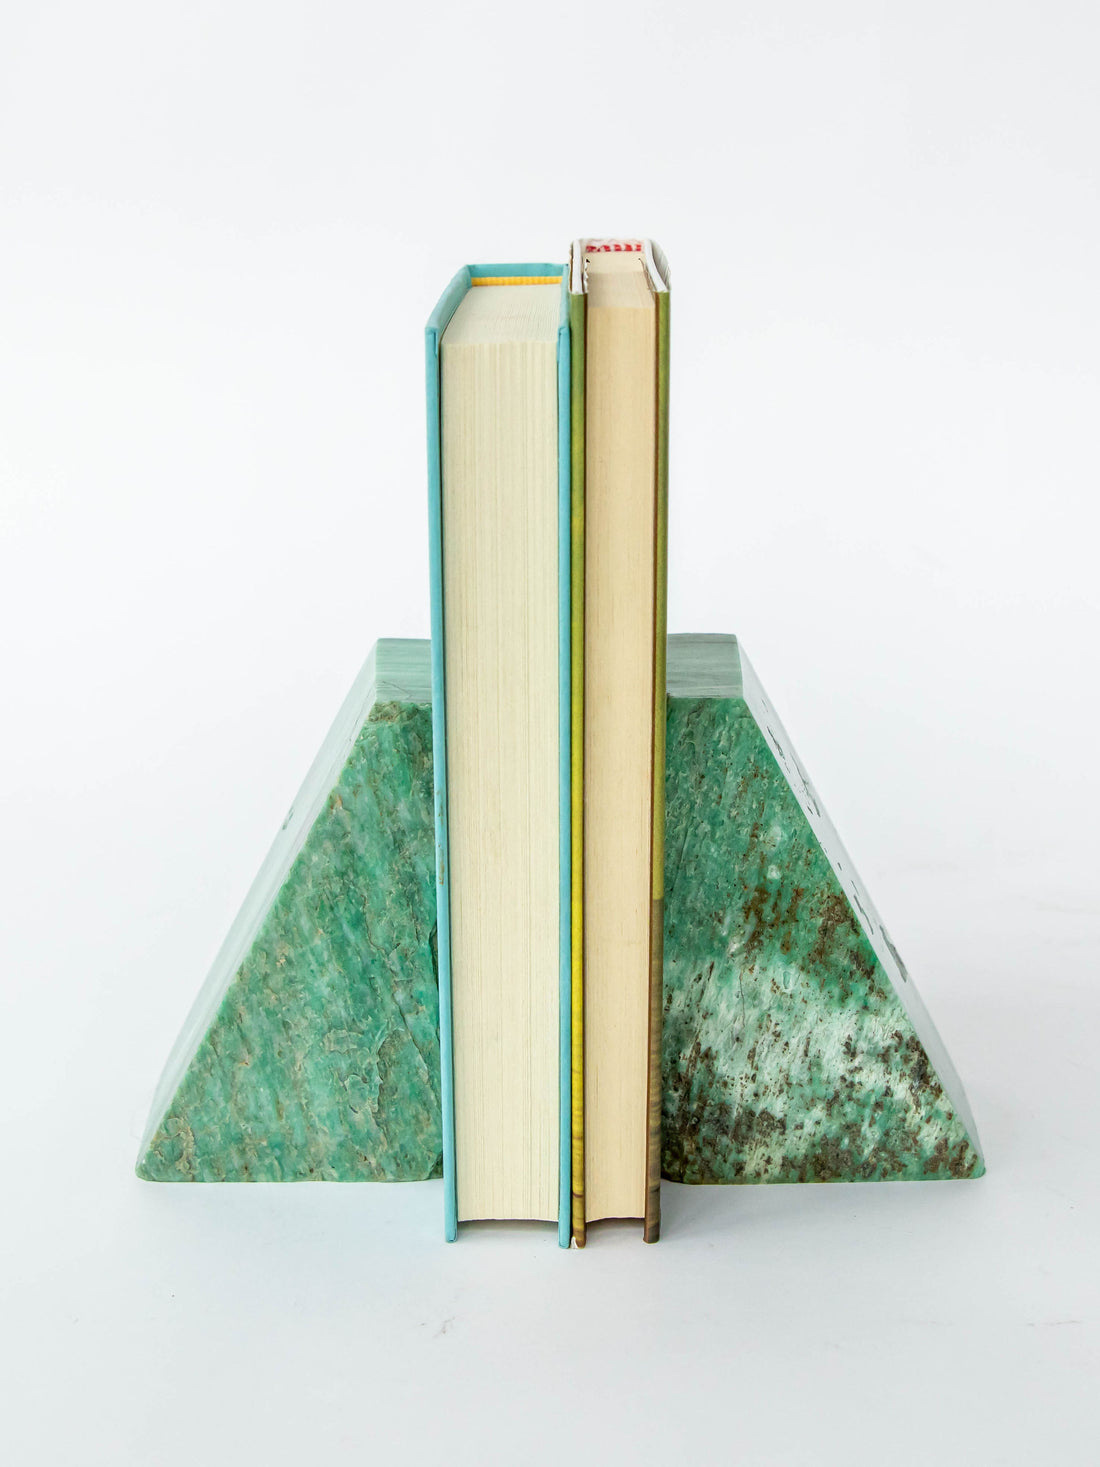 Teal Green Marble Bookend - Set of 2